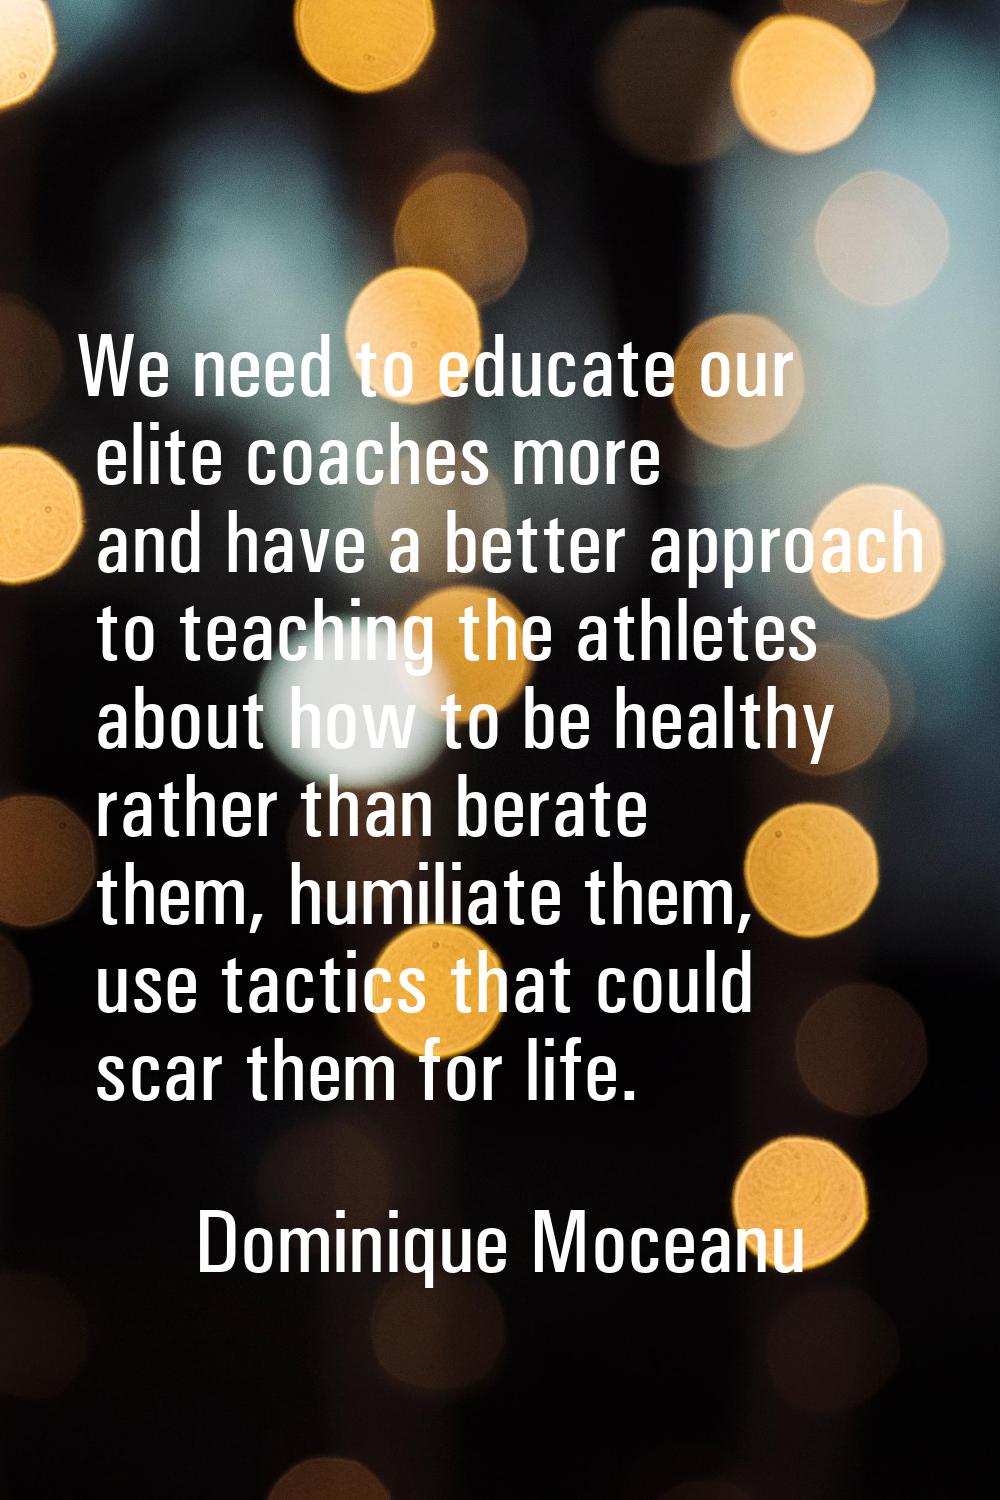 We need to educate our elite coaches more and have a better approach to teaching the athletes about